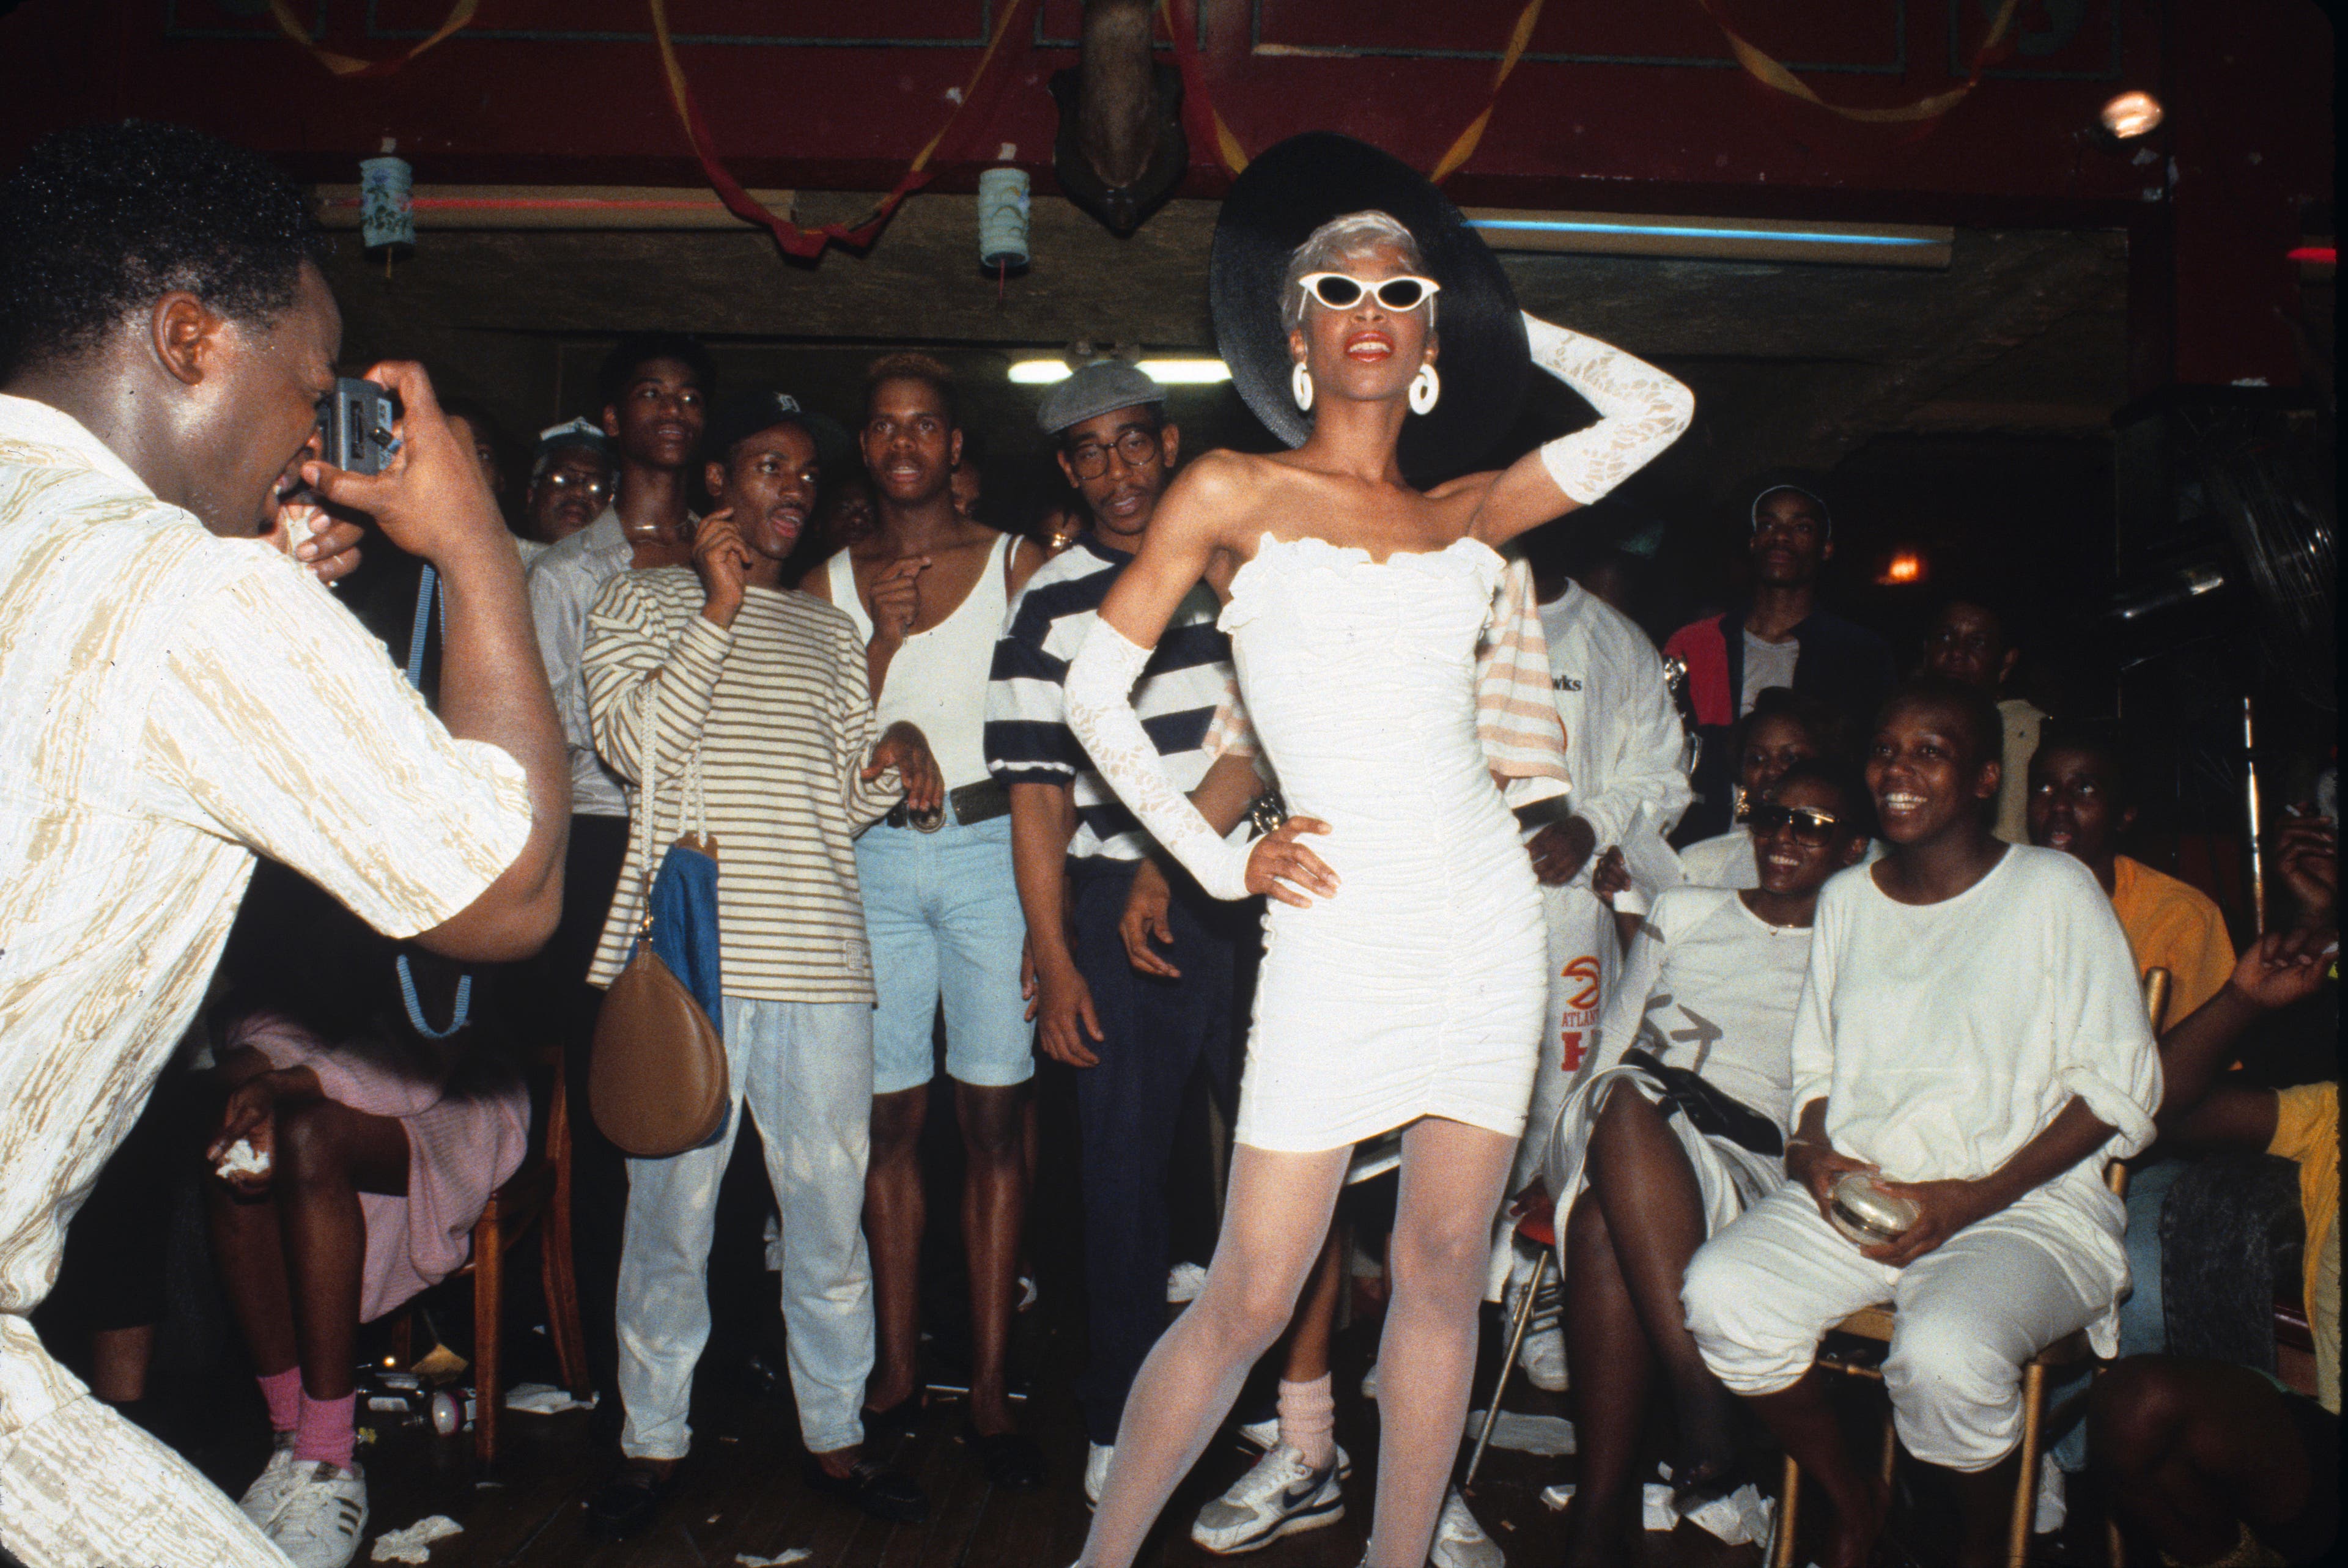 NEW YORK - 1988: Drag ball in 1988 in New York City, New York. Pictured: Octavia St. Laurent, 1964 -2009. (Photo by Catherine McGann/Getty Images)